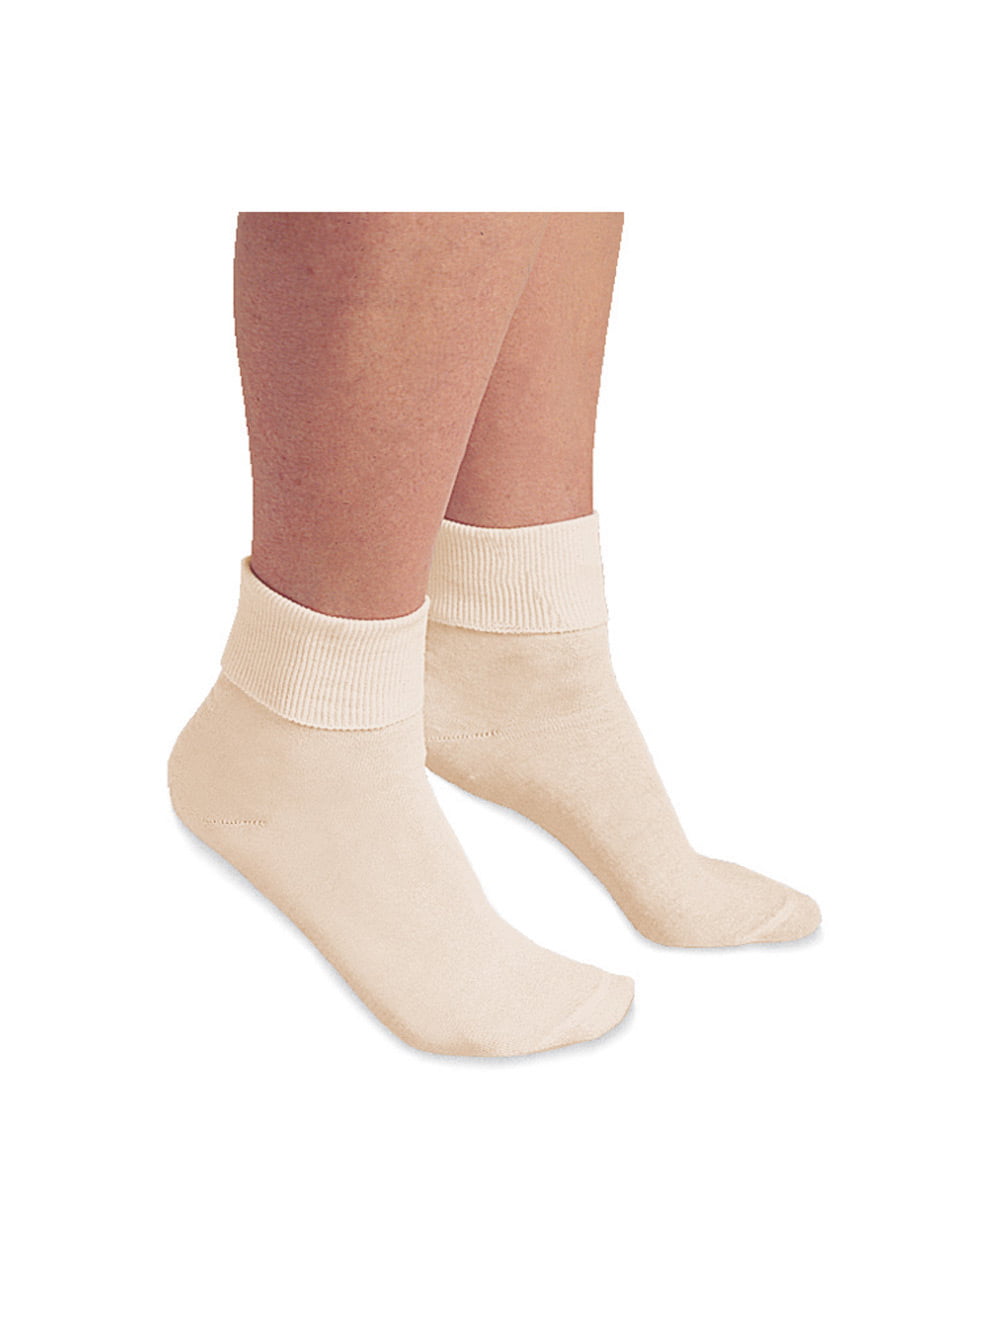 Buster Brown Buster Brown Womens 100 Cotton Socks 3 Pair Package